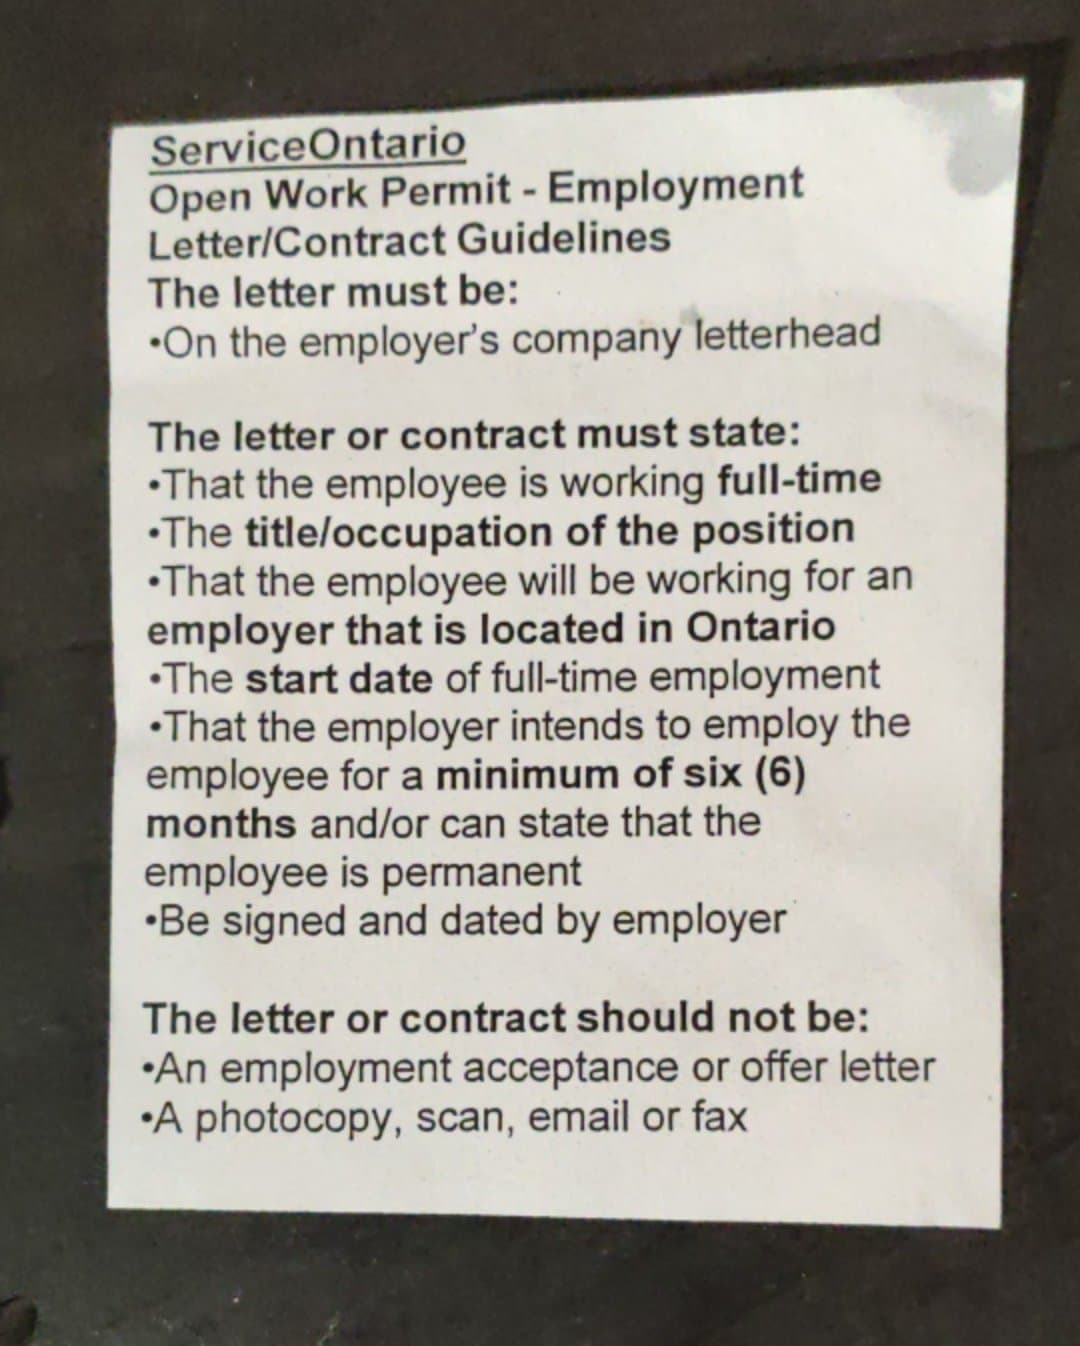 employment letter instruction for OHIP by service ontario.jpg